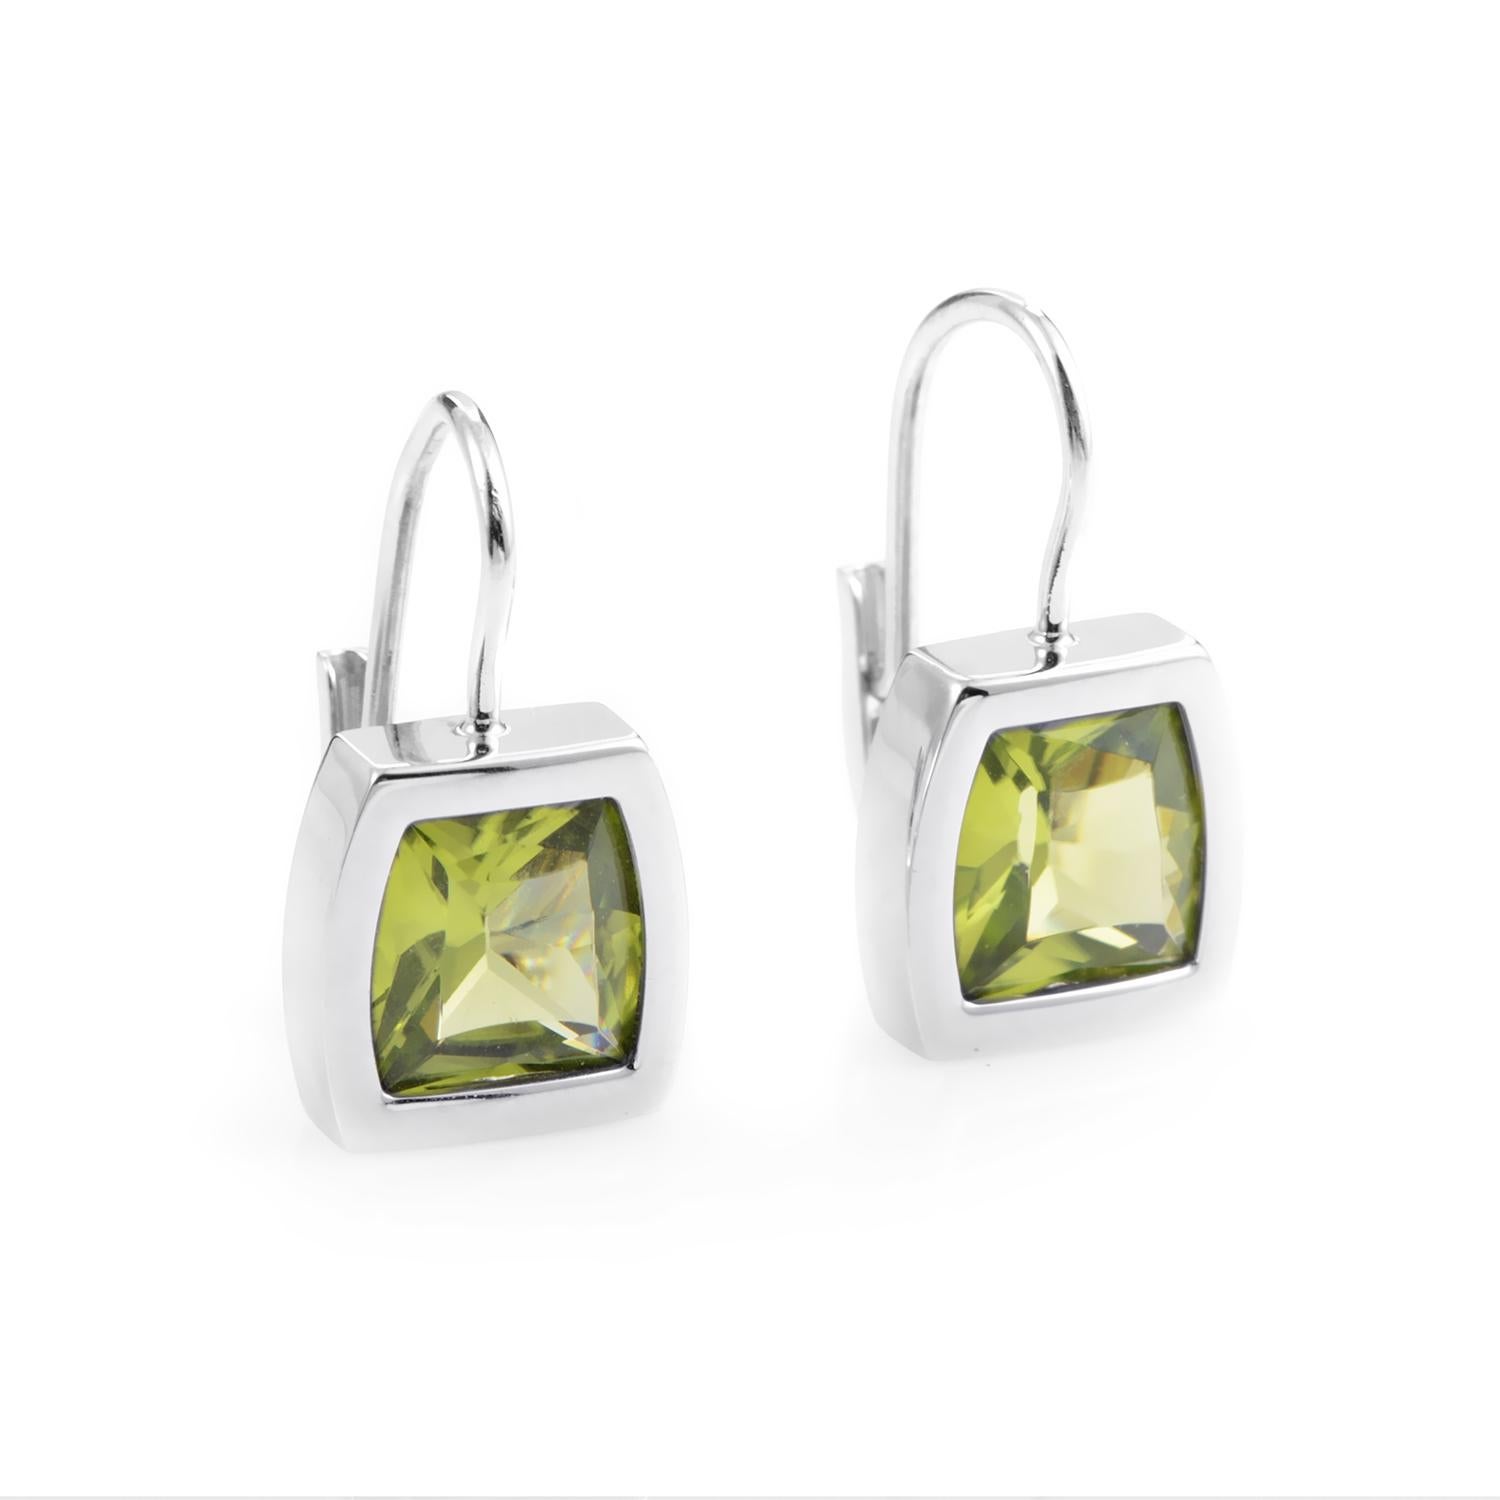 These understated yet fabulous earrings by Cartier are captivating. The earrings are made of 18K white gold and box set with ~1.20ct of peridot.
